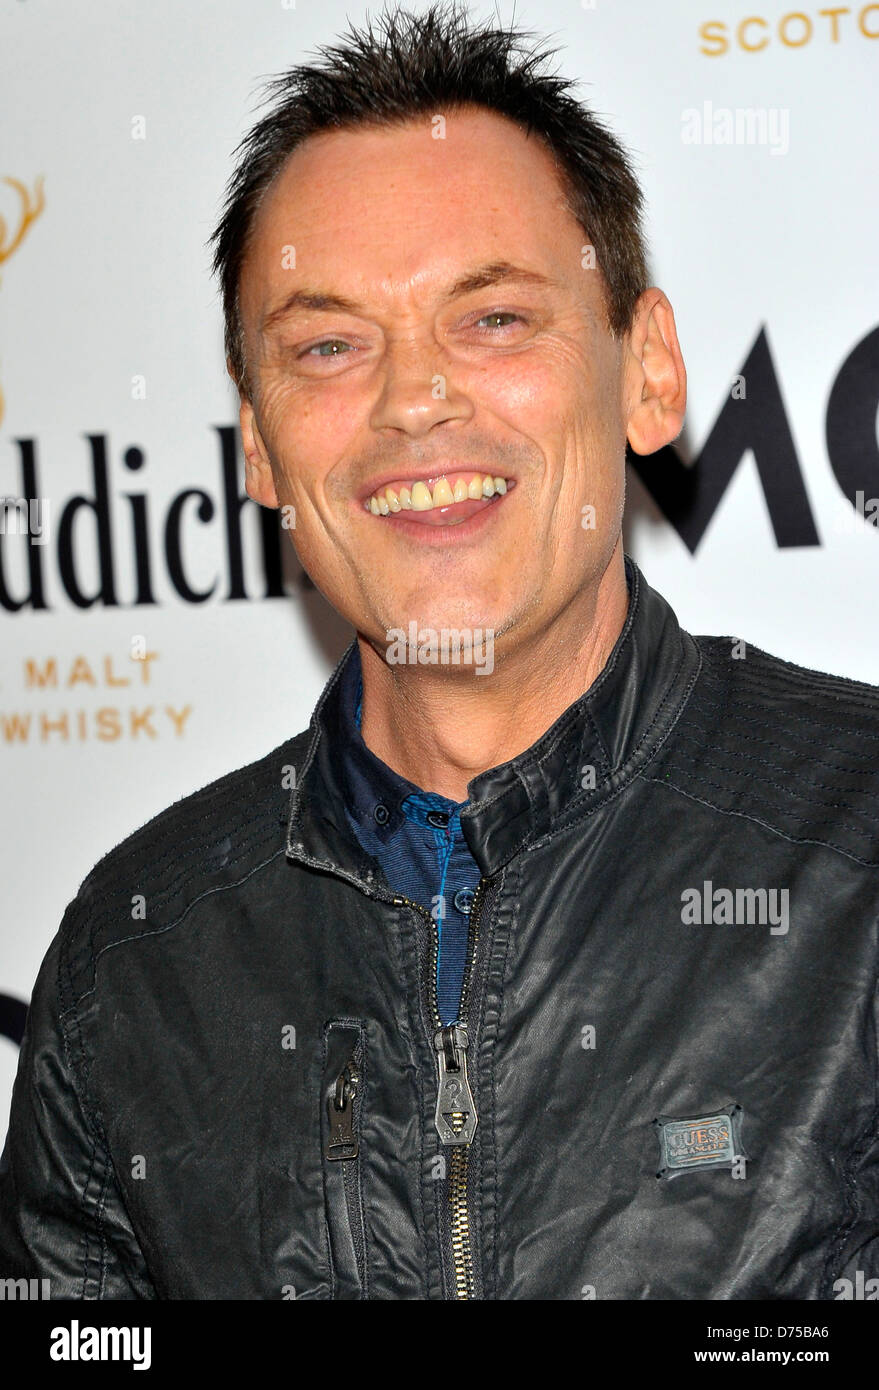 Terry Christian Glenfiddich Mojo Honours List 2011 Awards Ceremony, held at The Brewery - Arrivals London, England - 21.07.11 Stock Photo